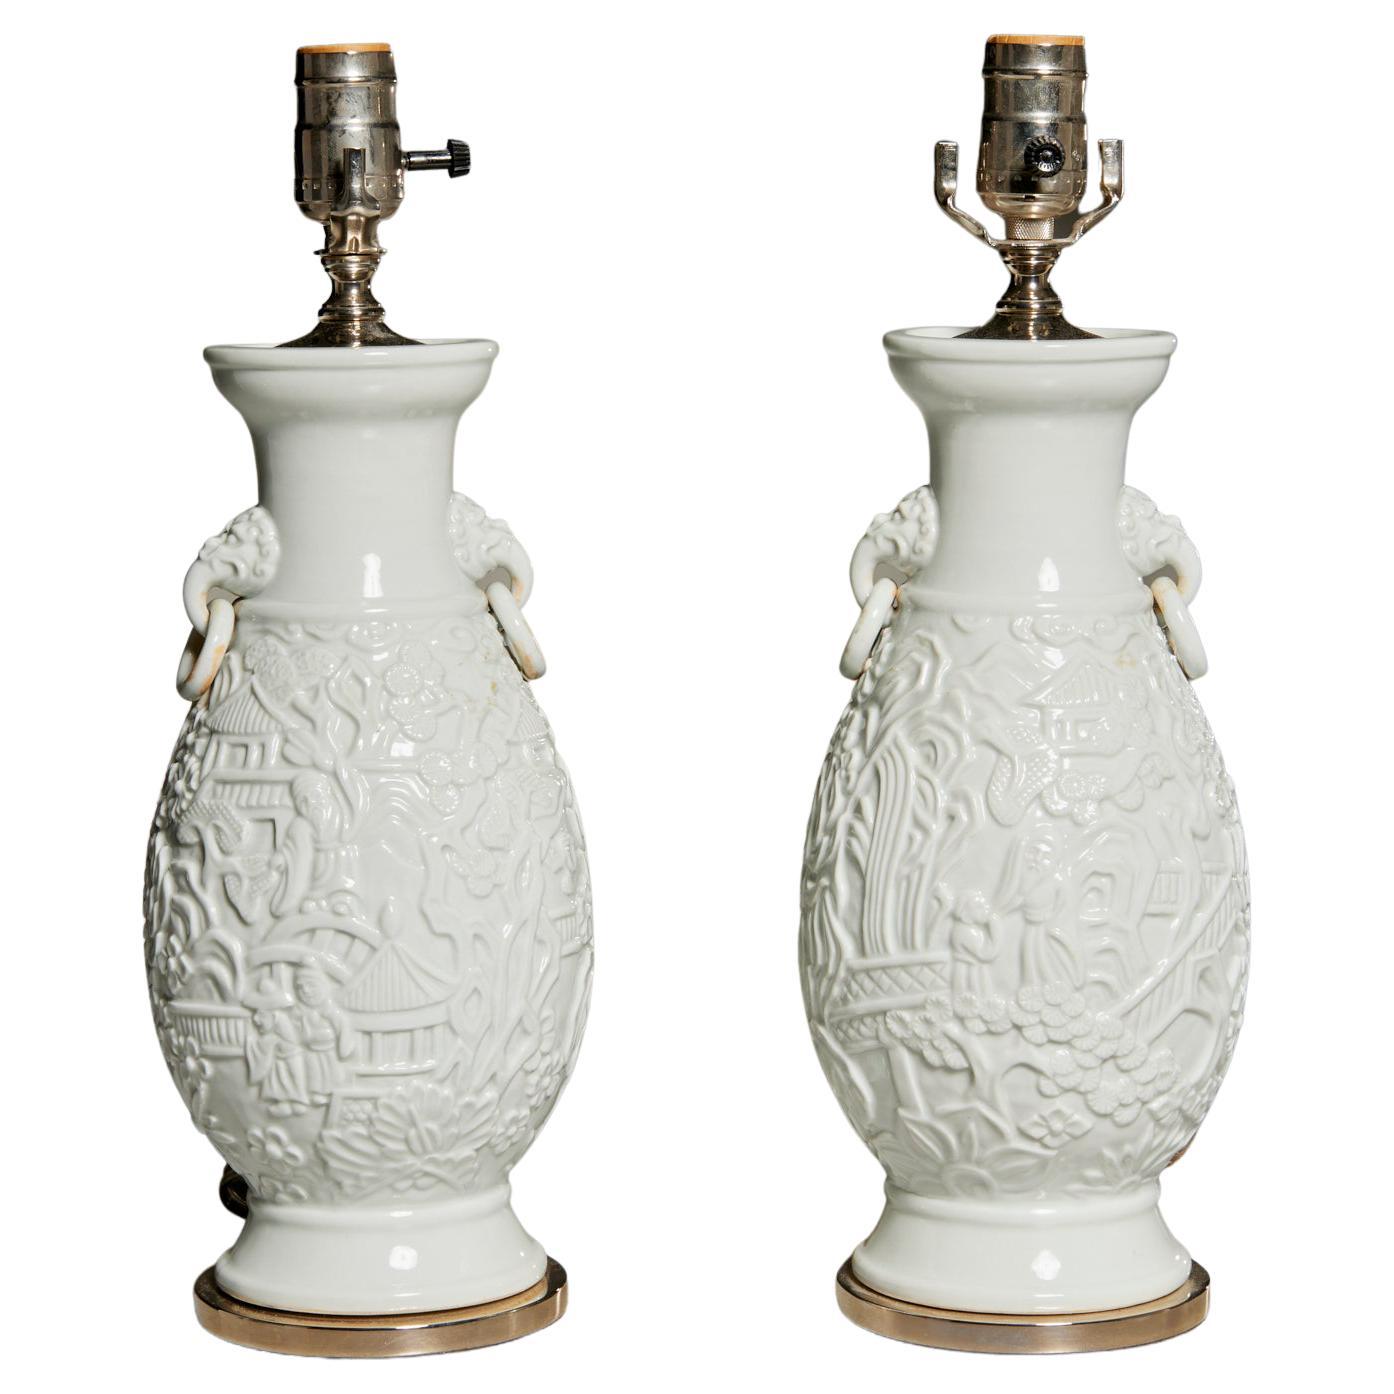 Pair of Blanc De Chine Vases Mounted as Table Lamps